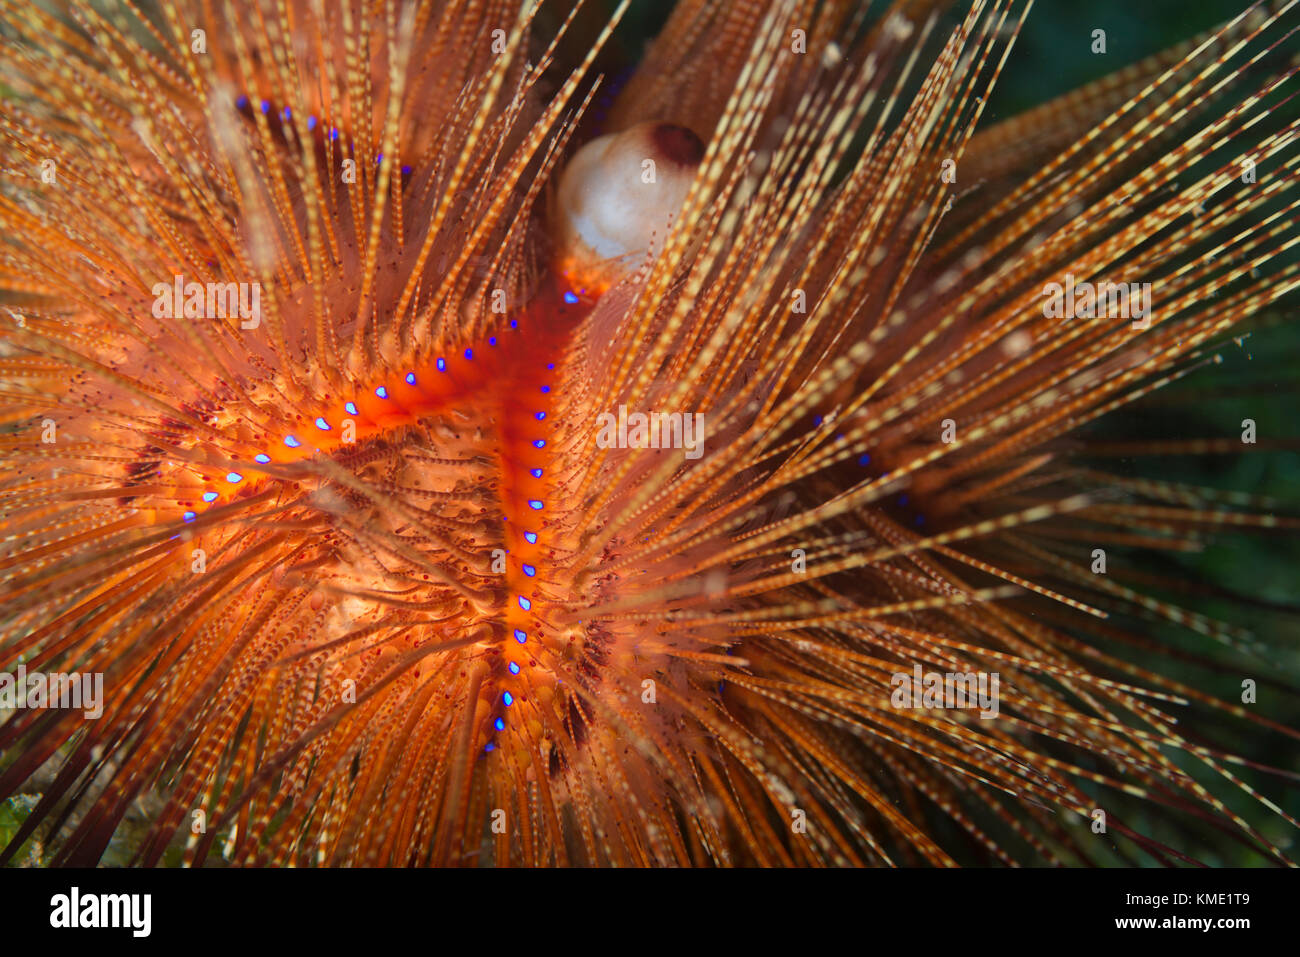 Blue-spotted sea urchin displaying its vibrant colors Stock Photo